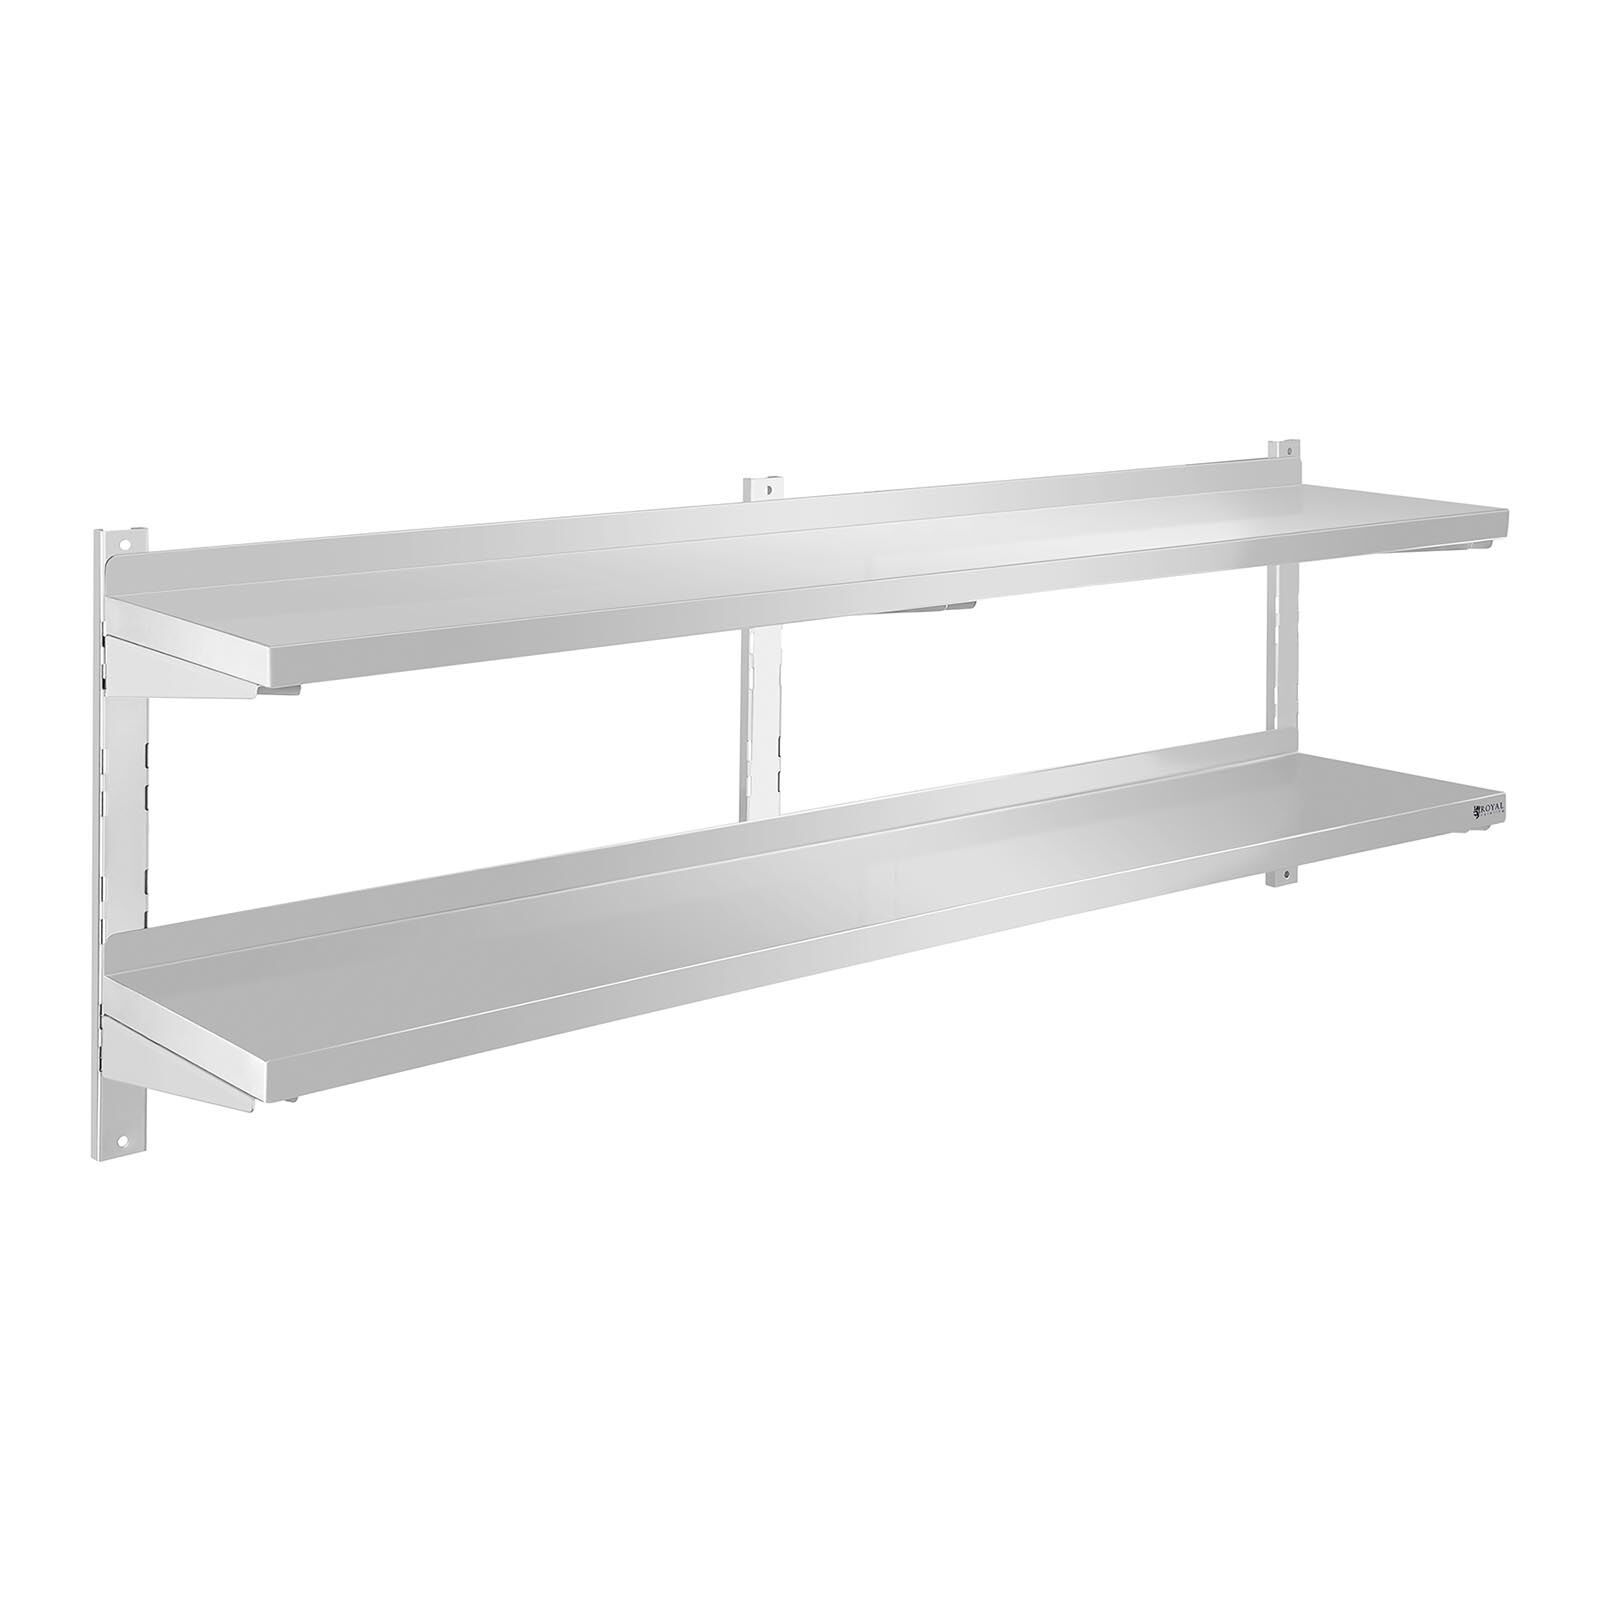 Royal Catering Stainless Steel Wall Shelf - 2 shelves - 160 cm RCWR-160.2